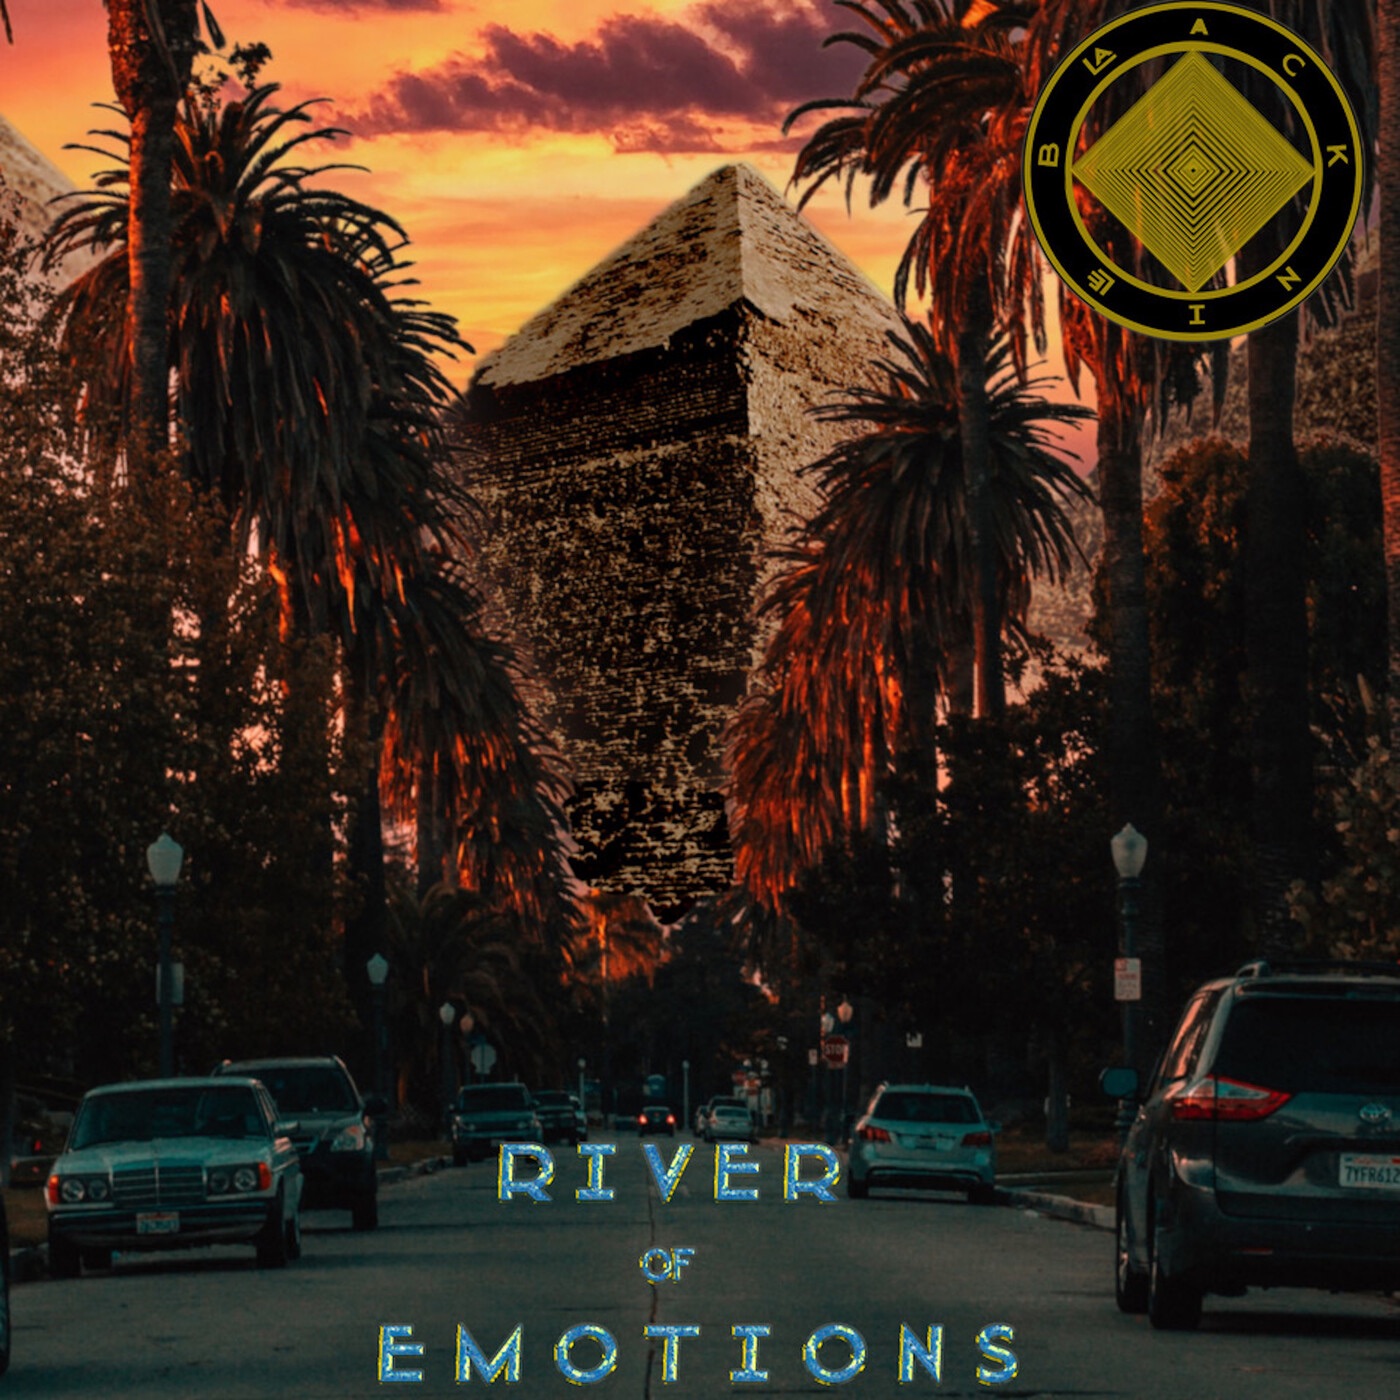 River of Emotions by Black Nile